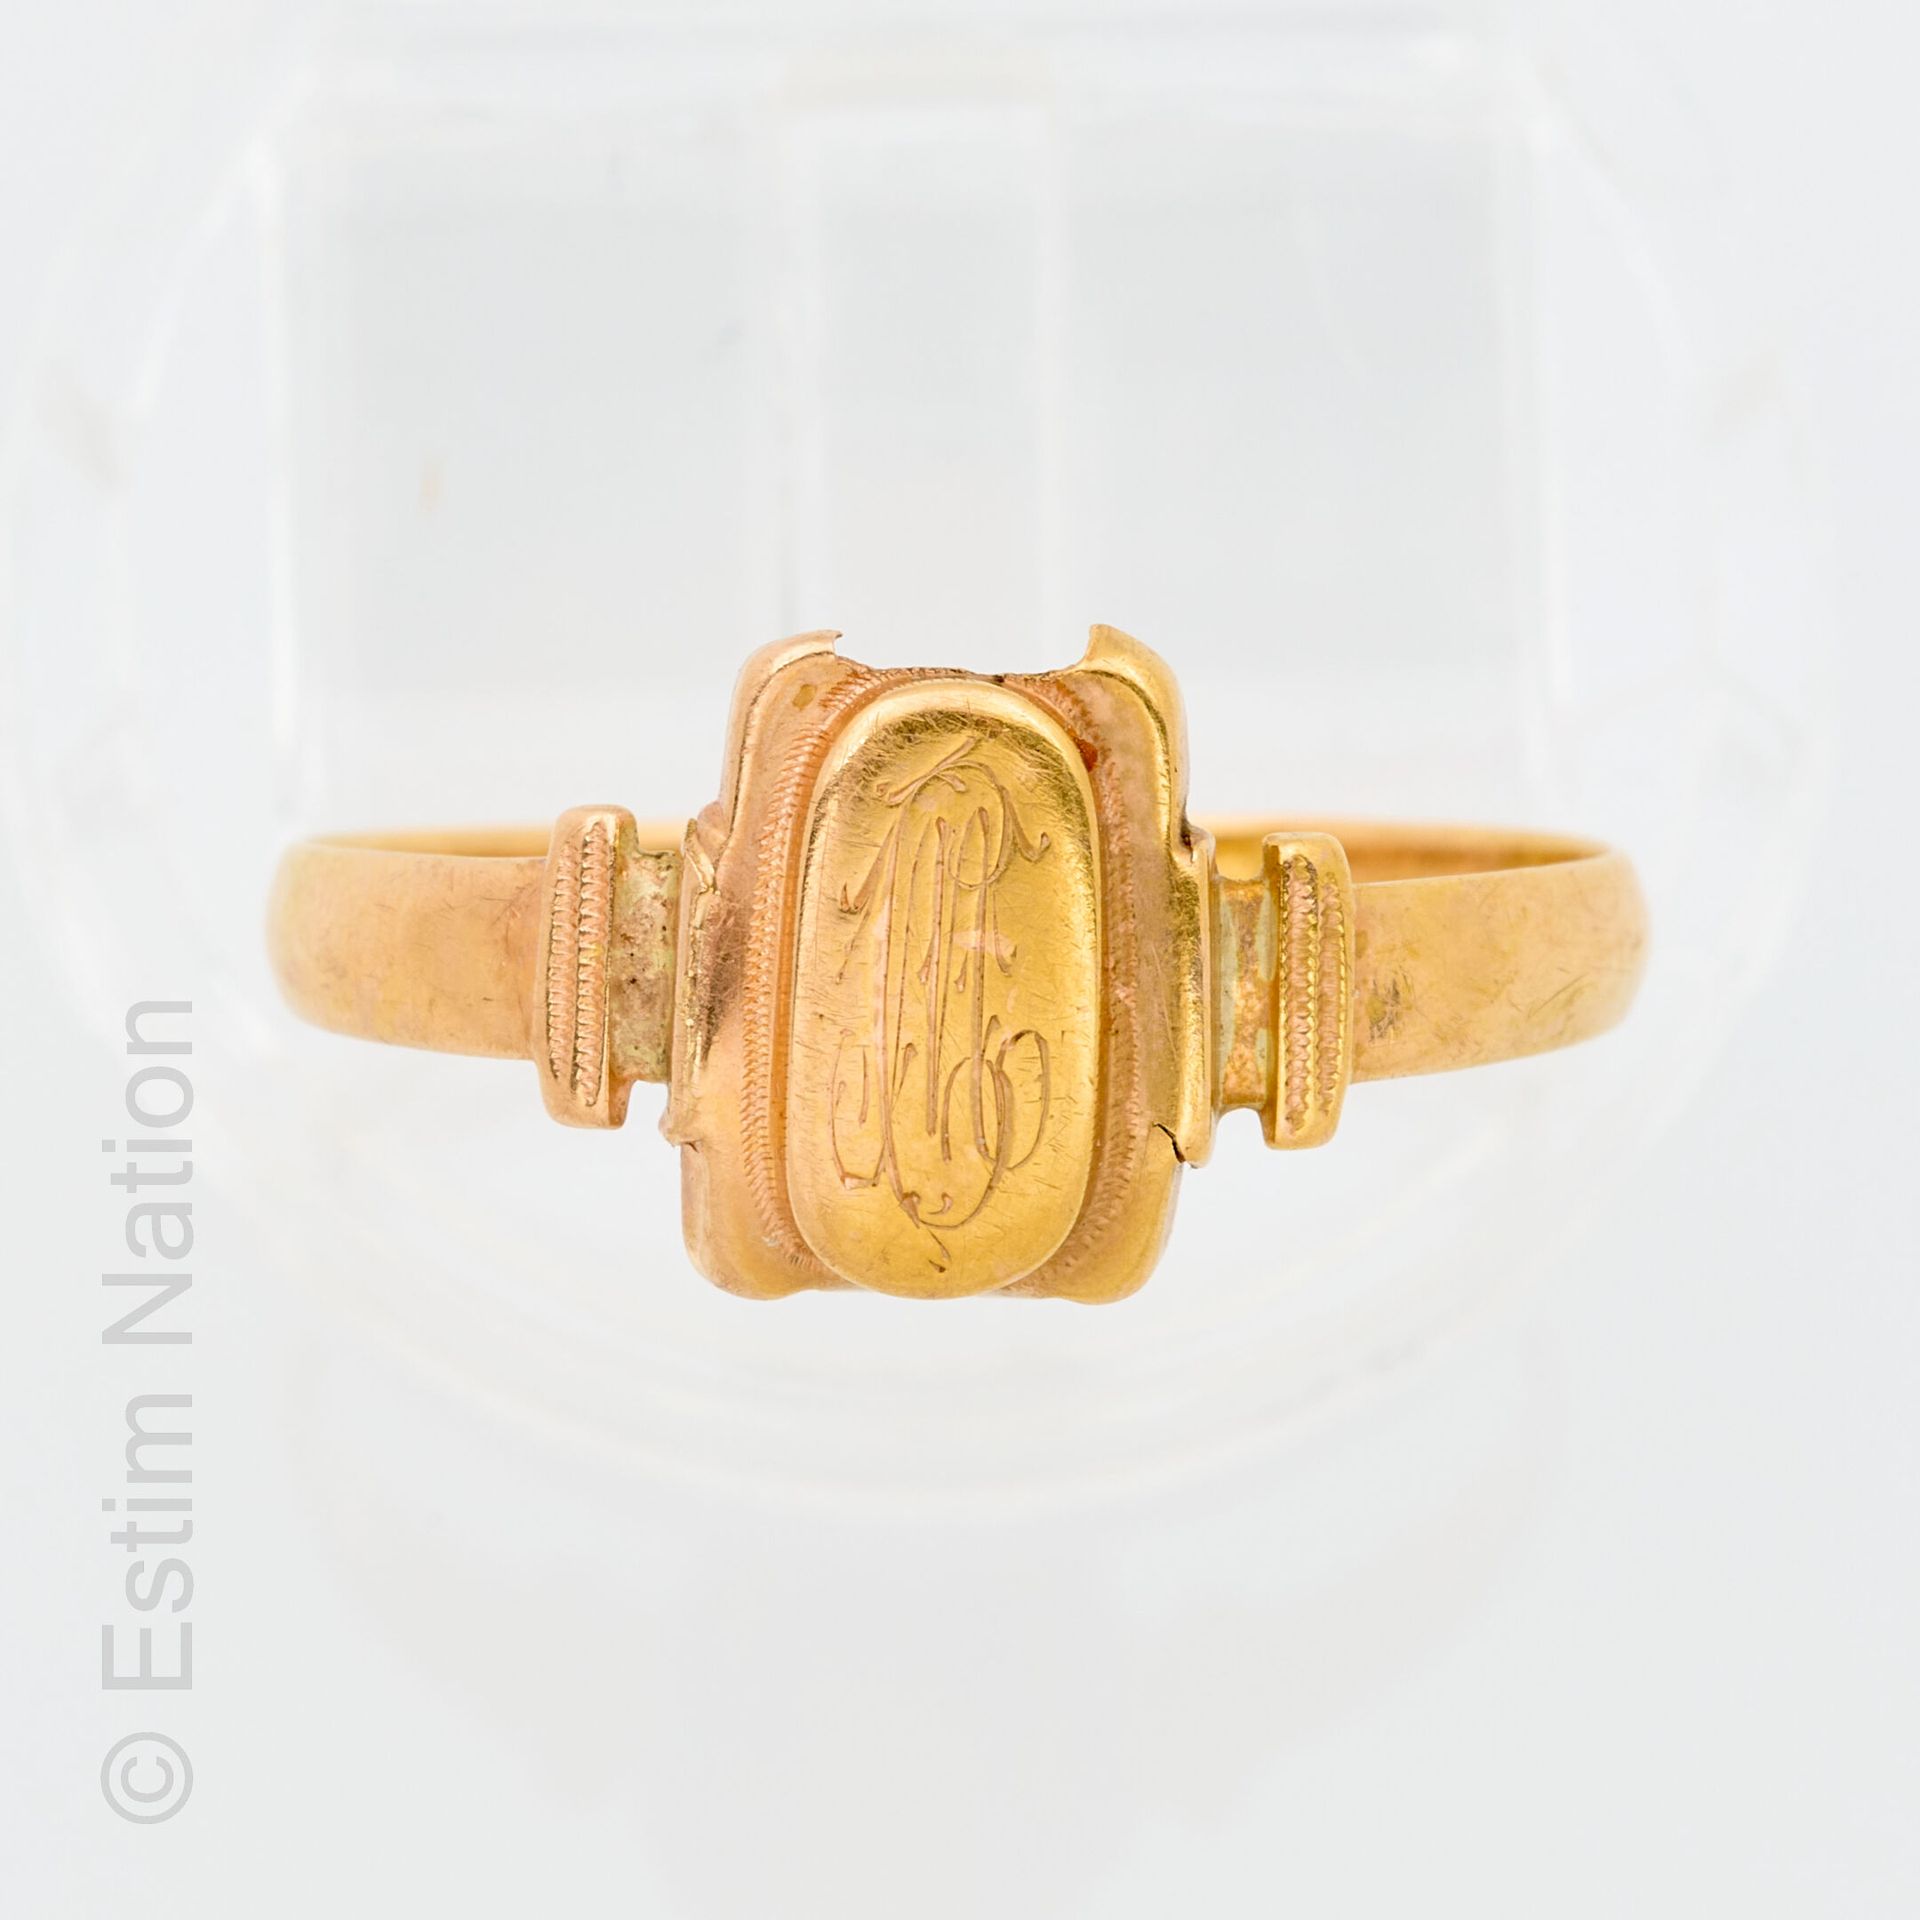 BAGUE OR JAUNE ARMOIRIES Fine Ring in yellow gold 18K (750 thousandths) chased a&hellip;